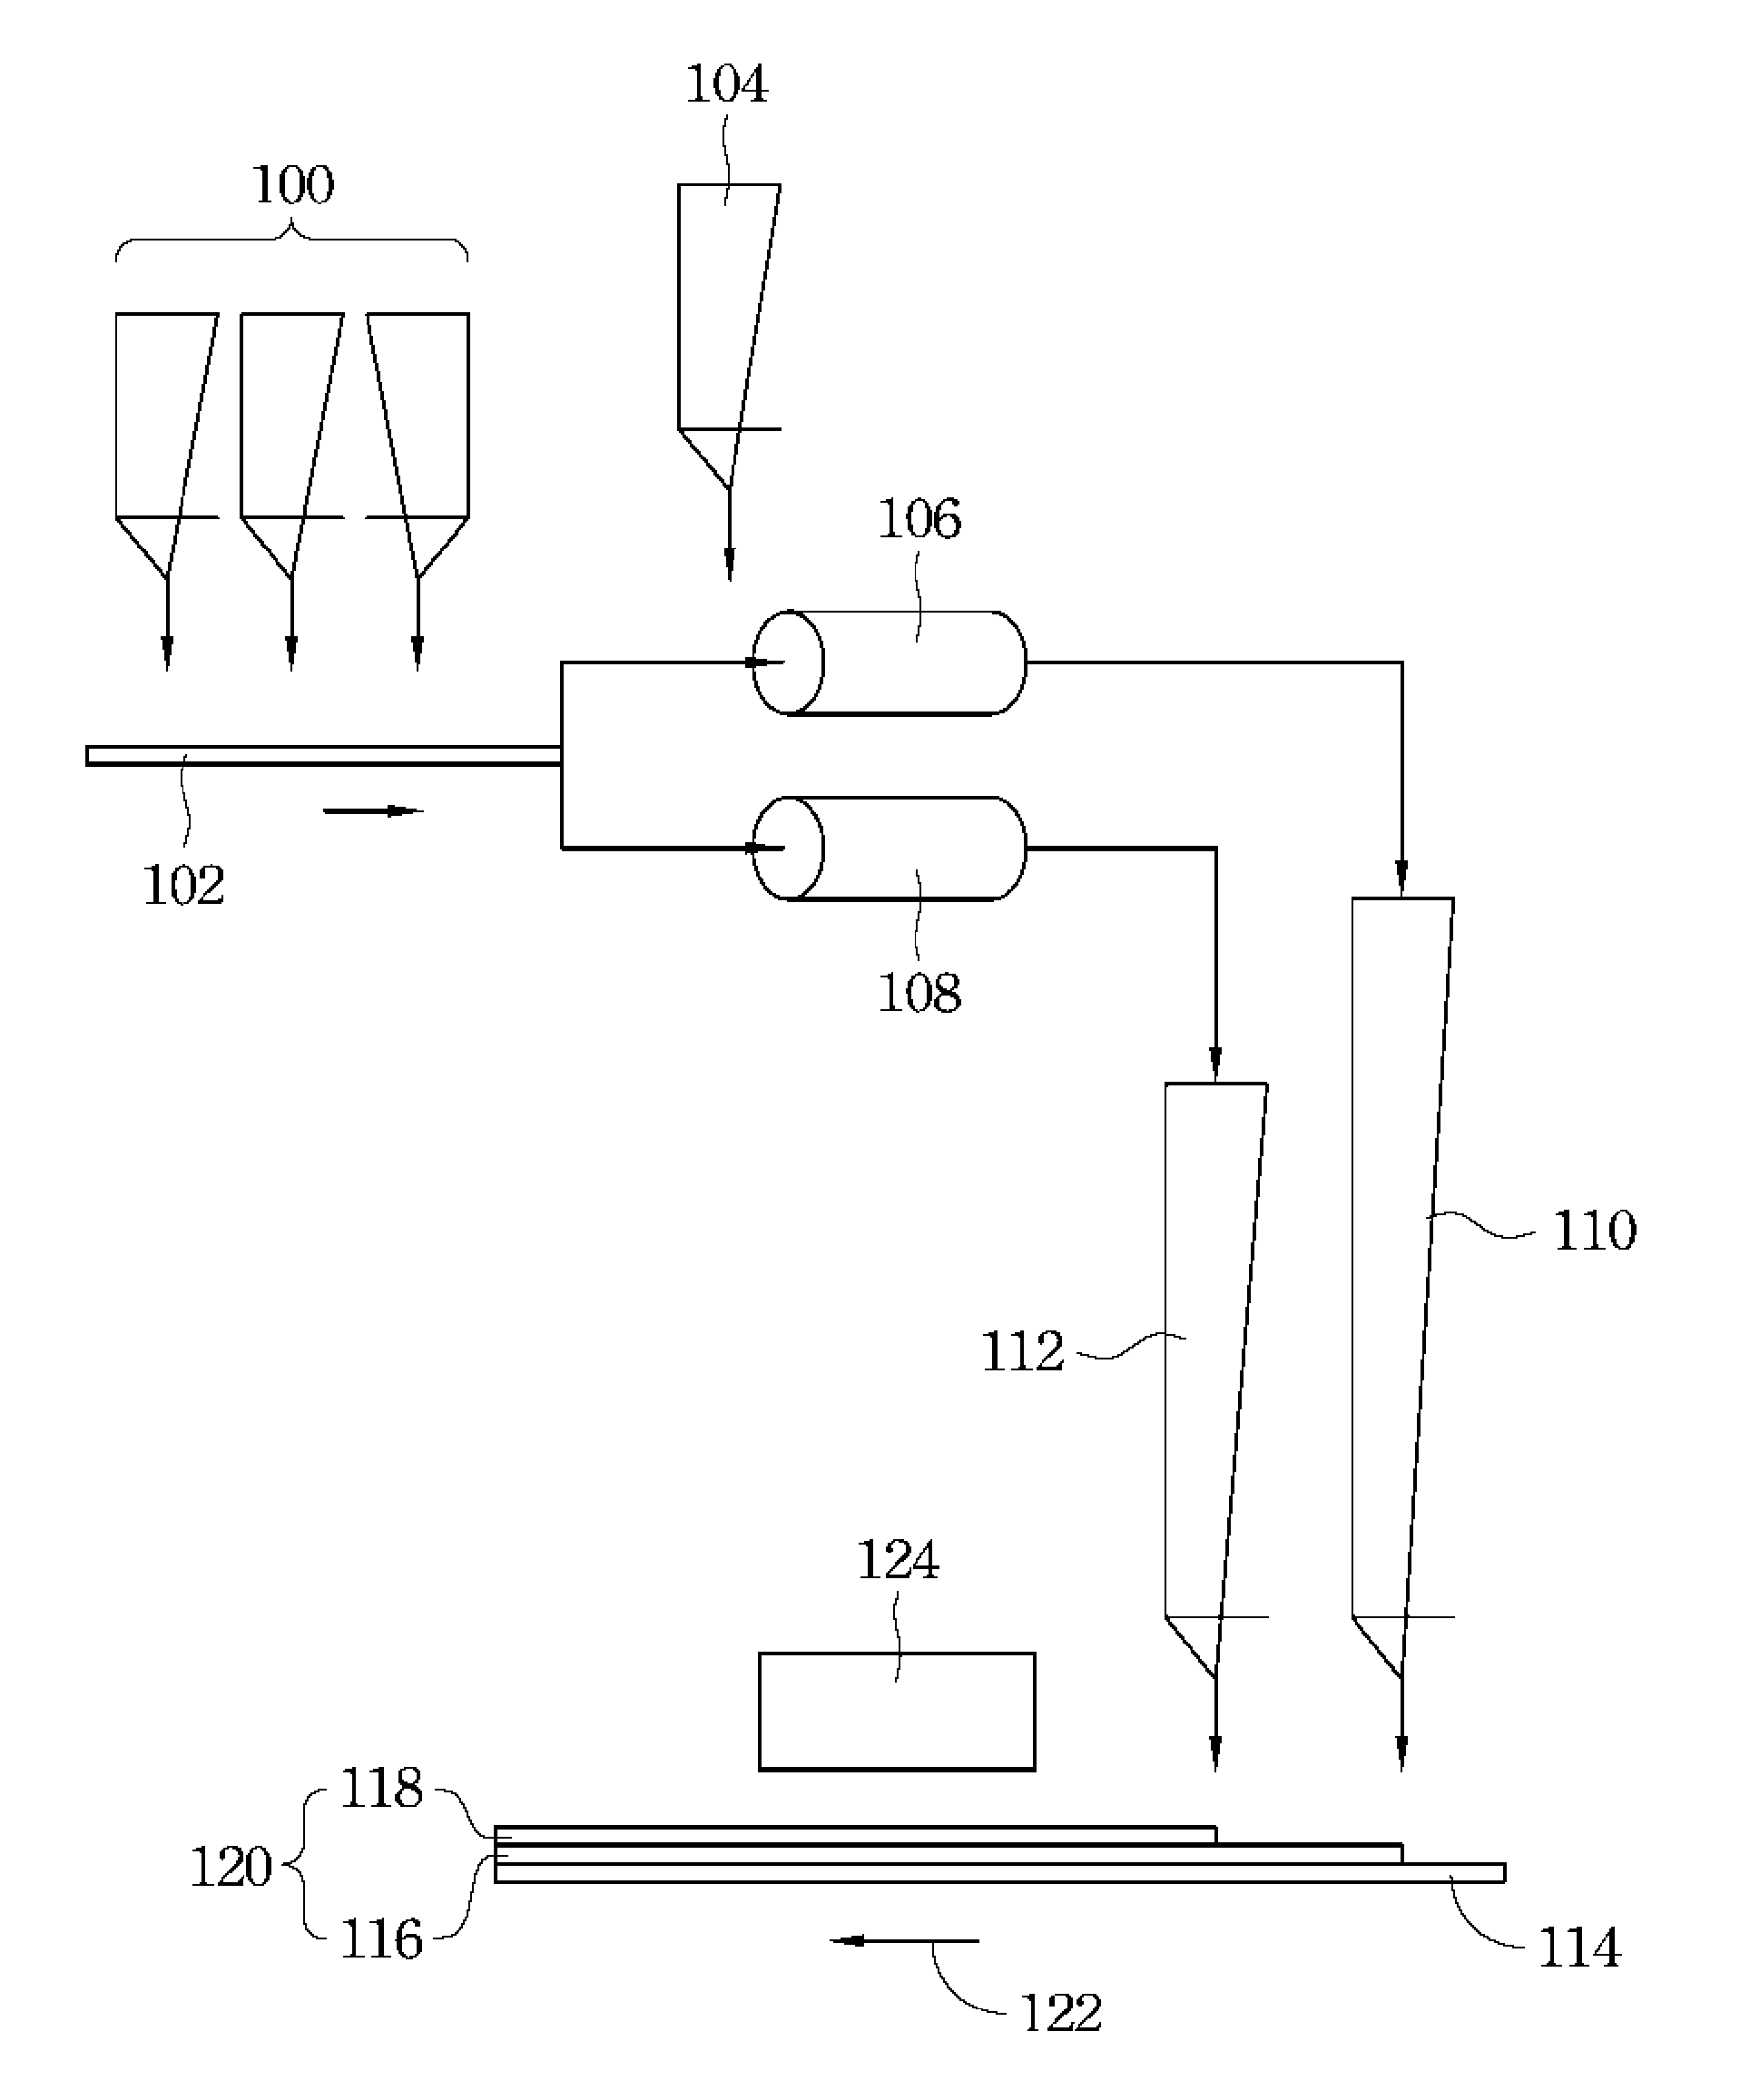 Method for increasing output of sintering process